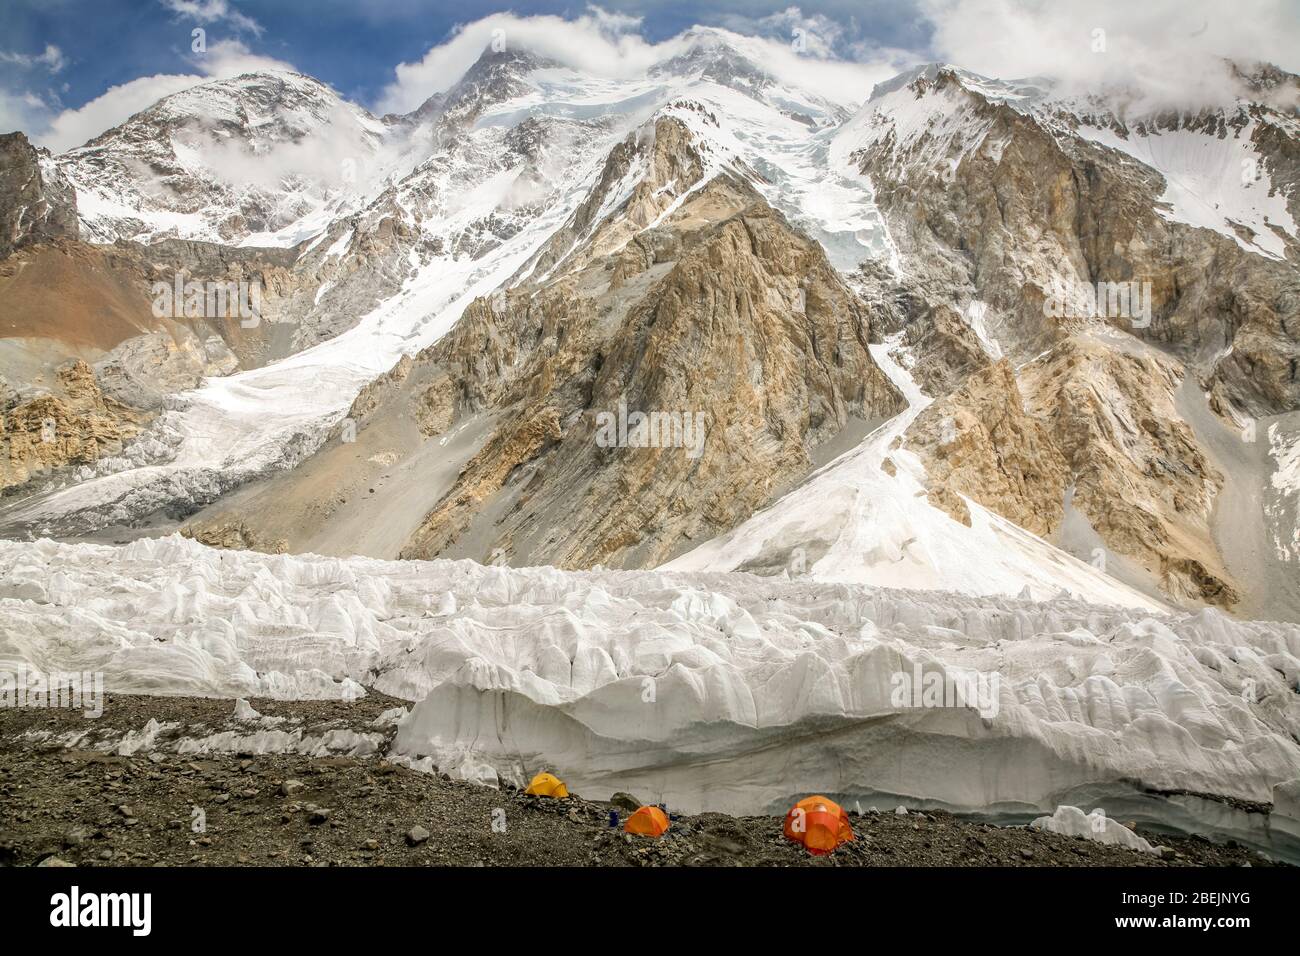 A small camp of climbers, beneath the Gasherbrum Mountains in the Karakoram range in Northern Pakistan. Stock Photo